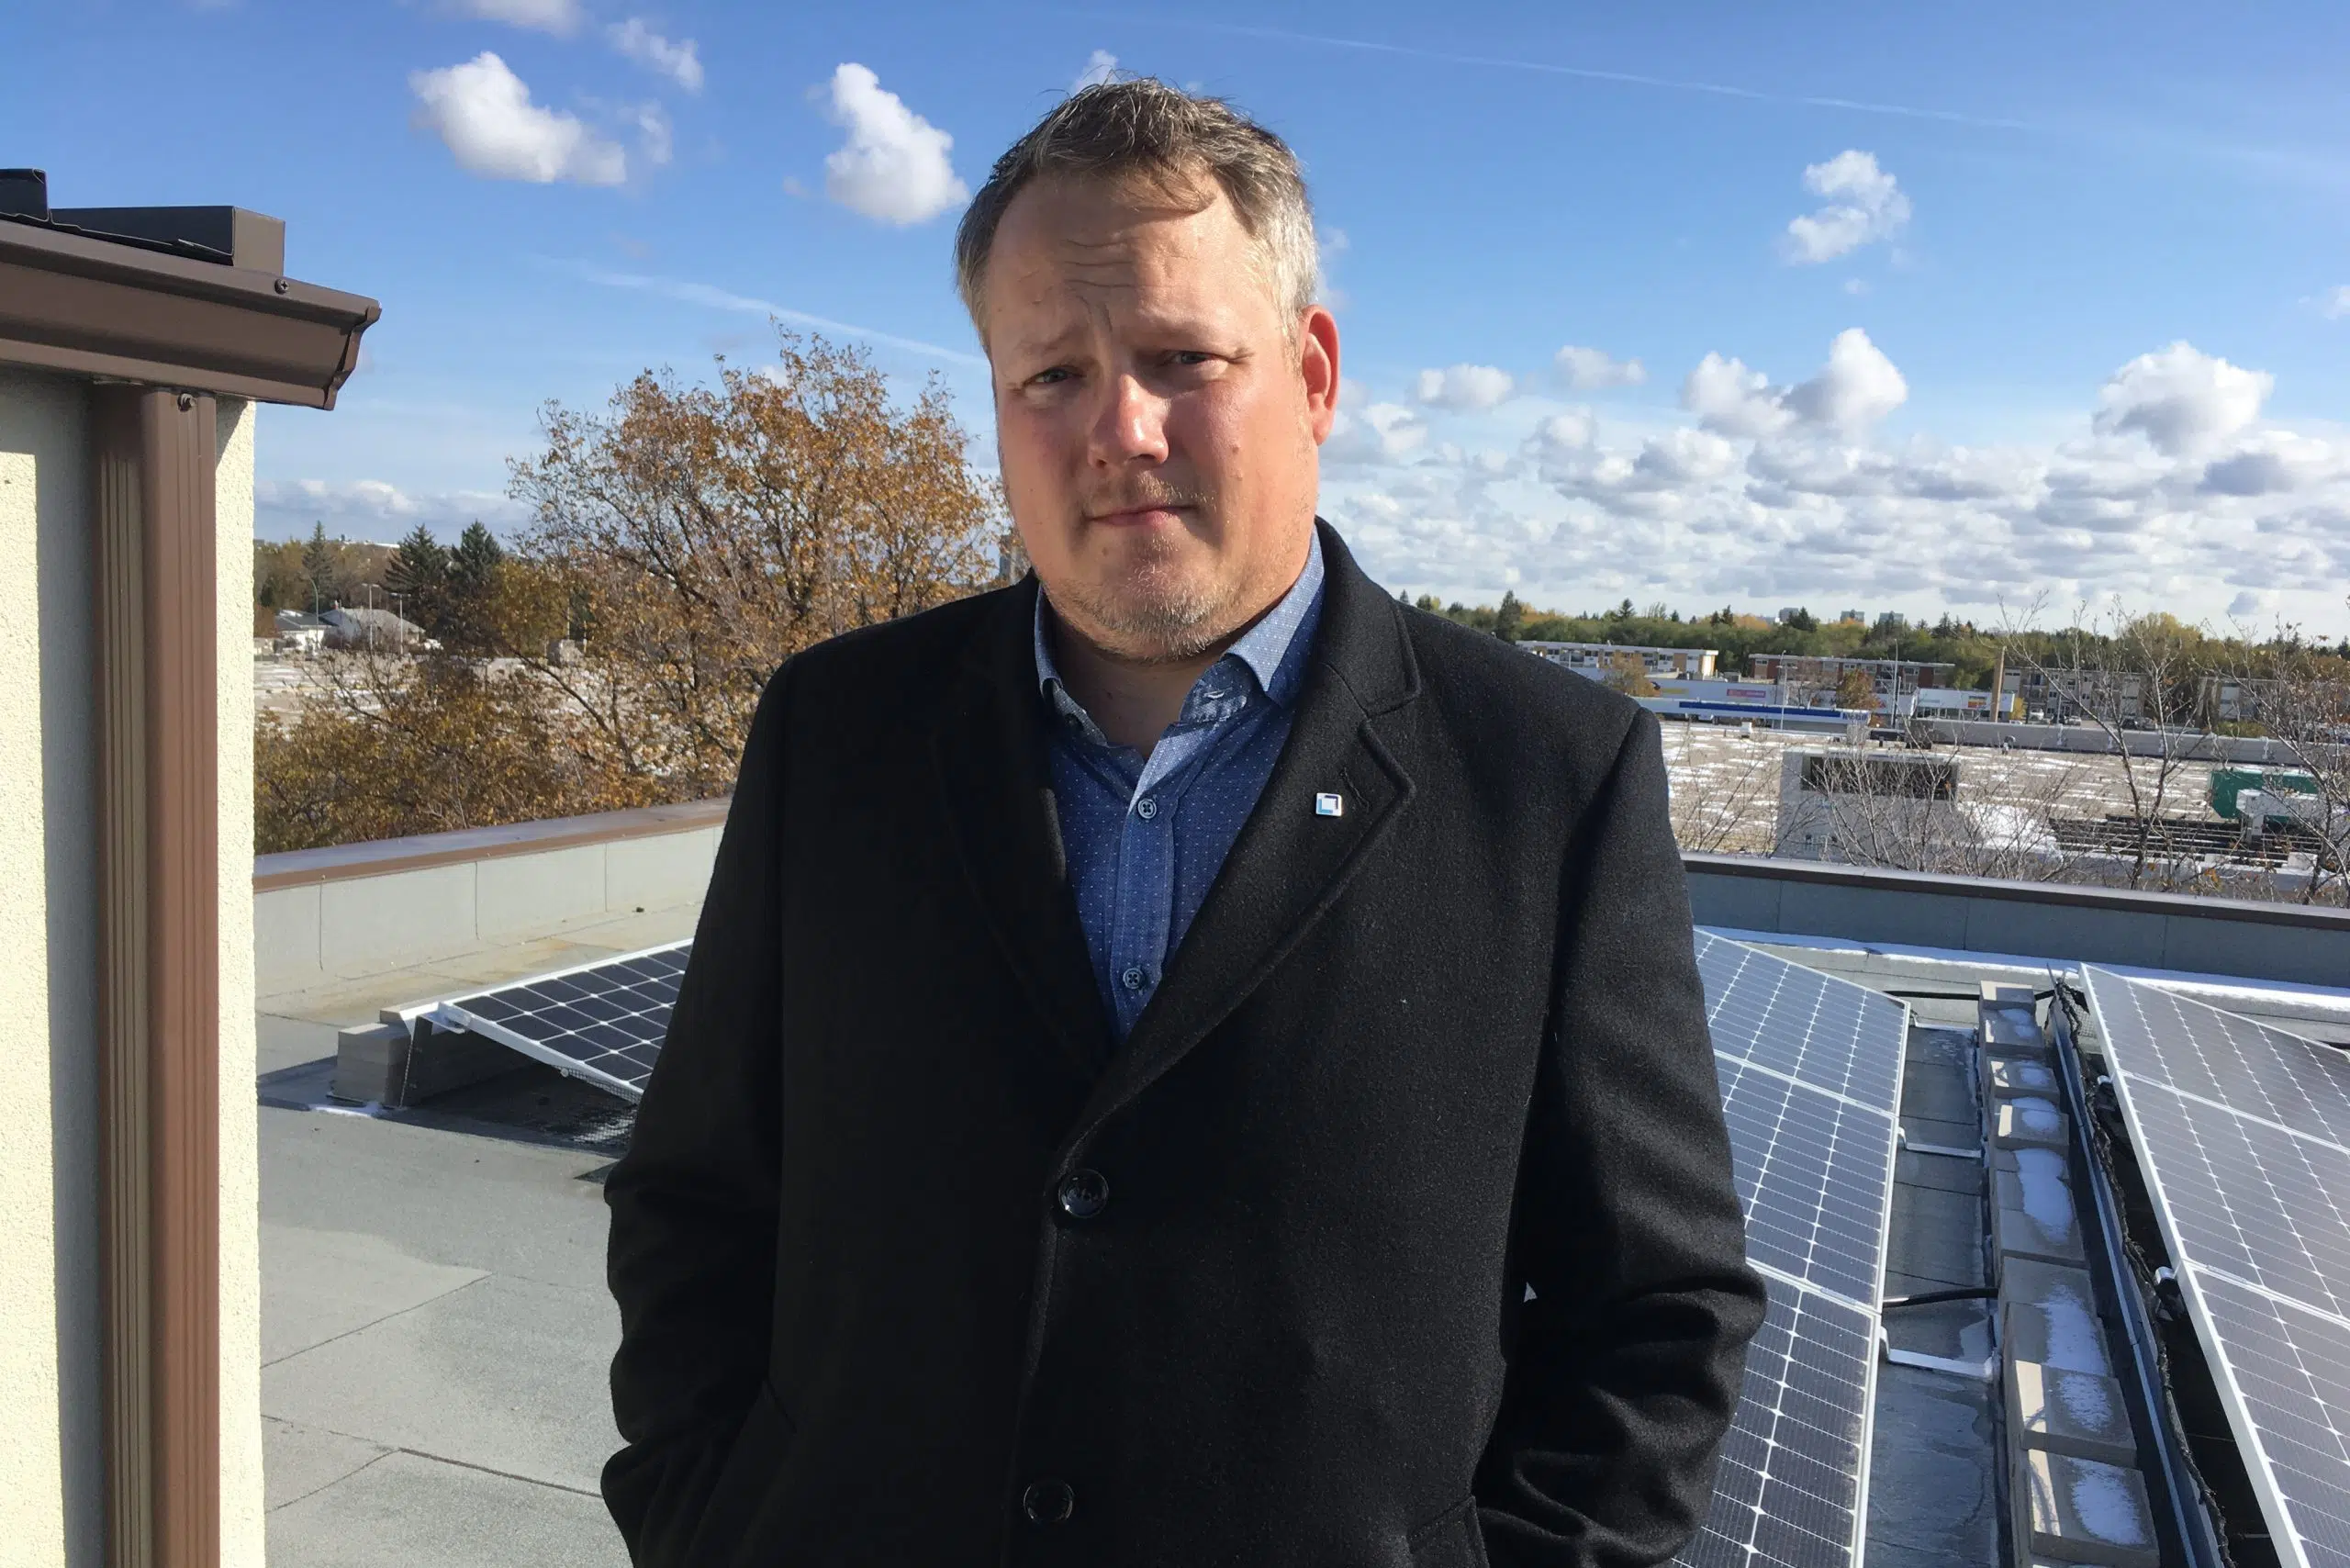 Solar company makes pitch for new net metering program